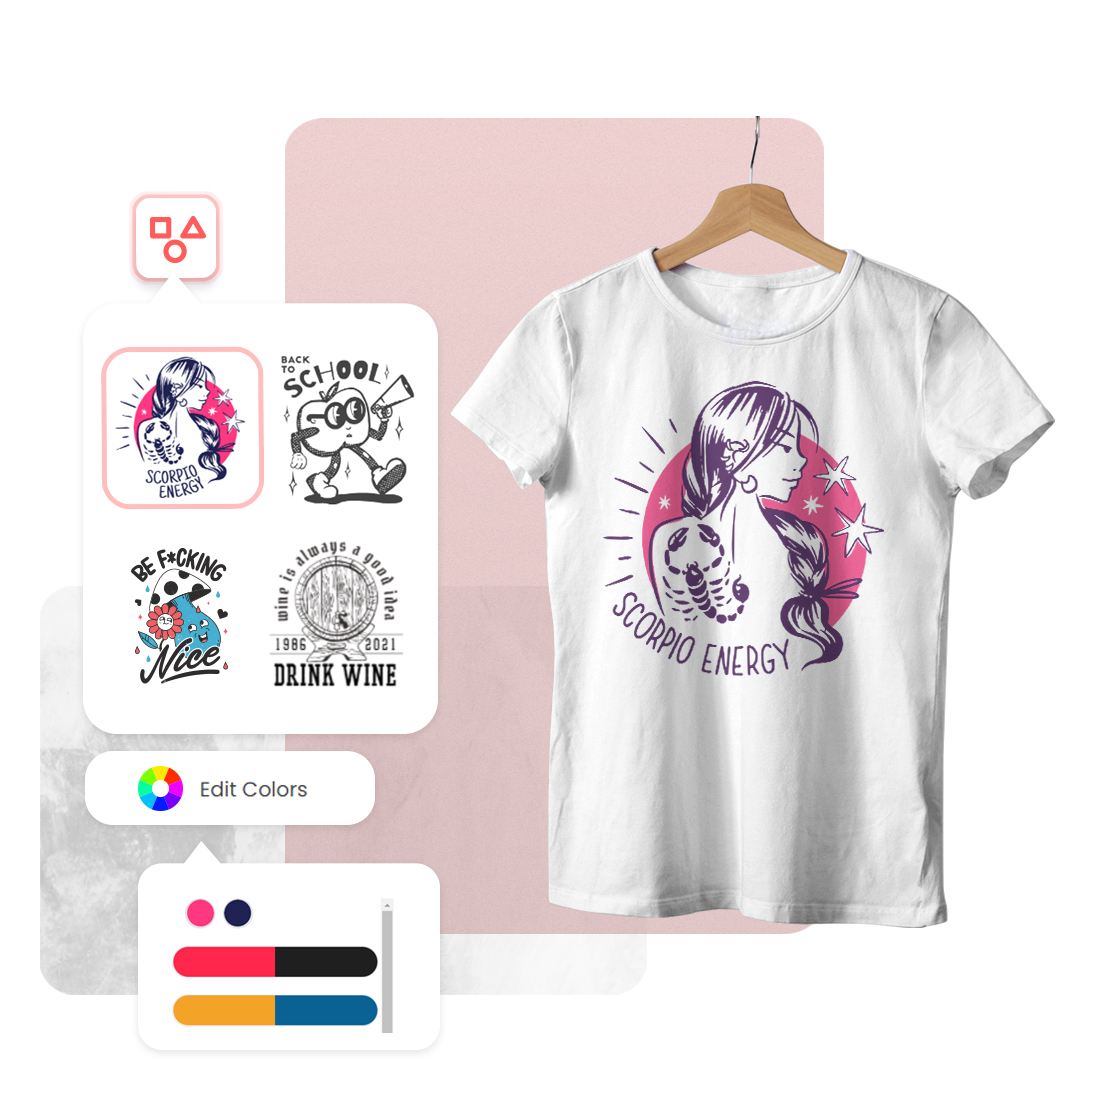 selection of different templates on the t-shirt creator